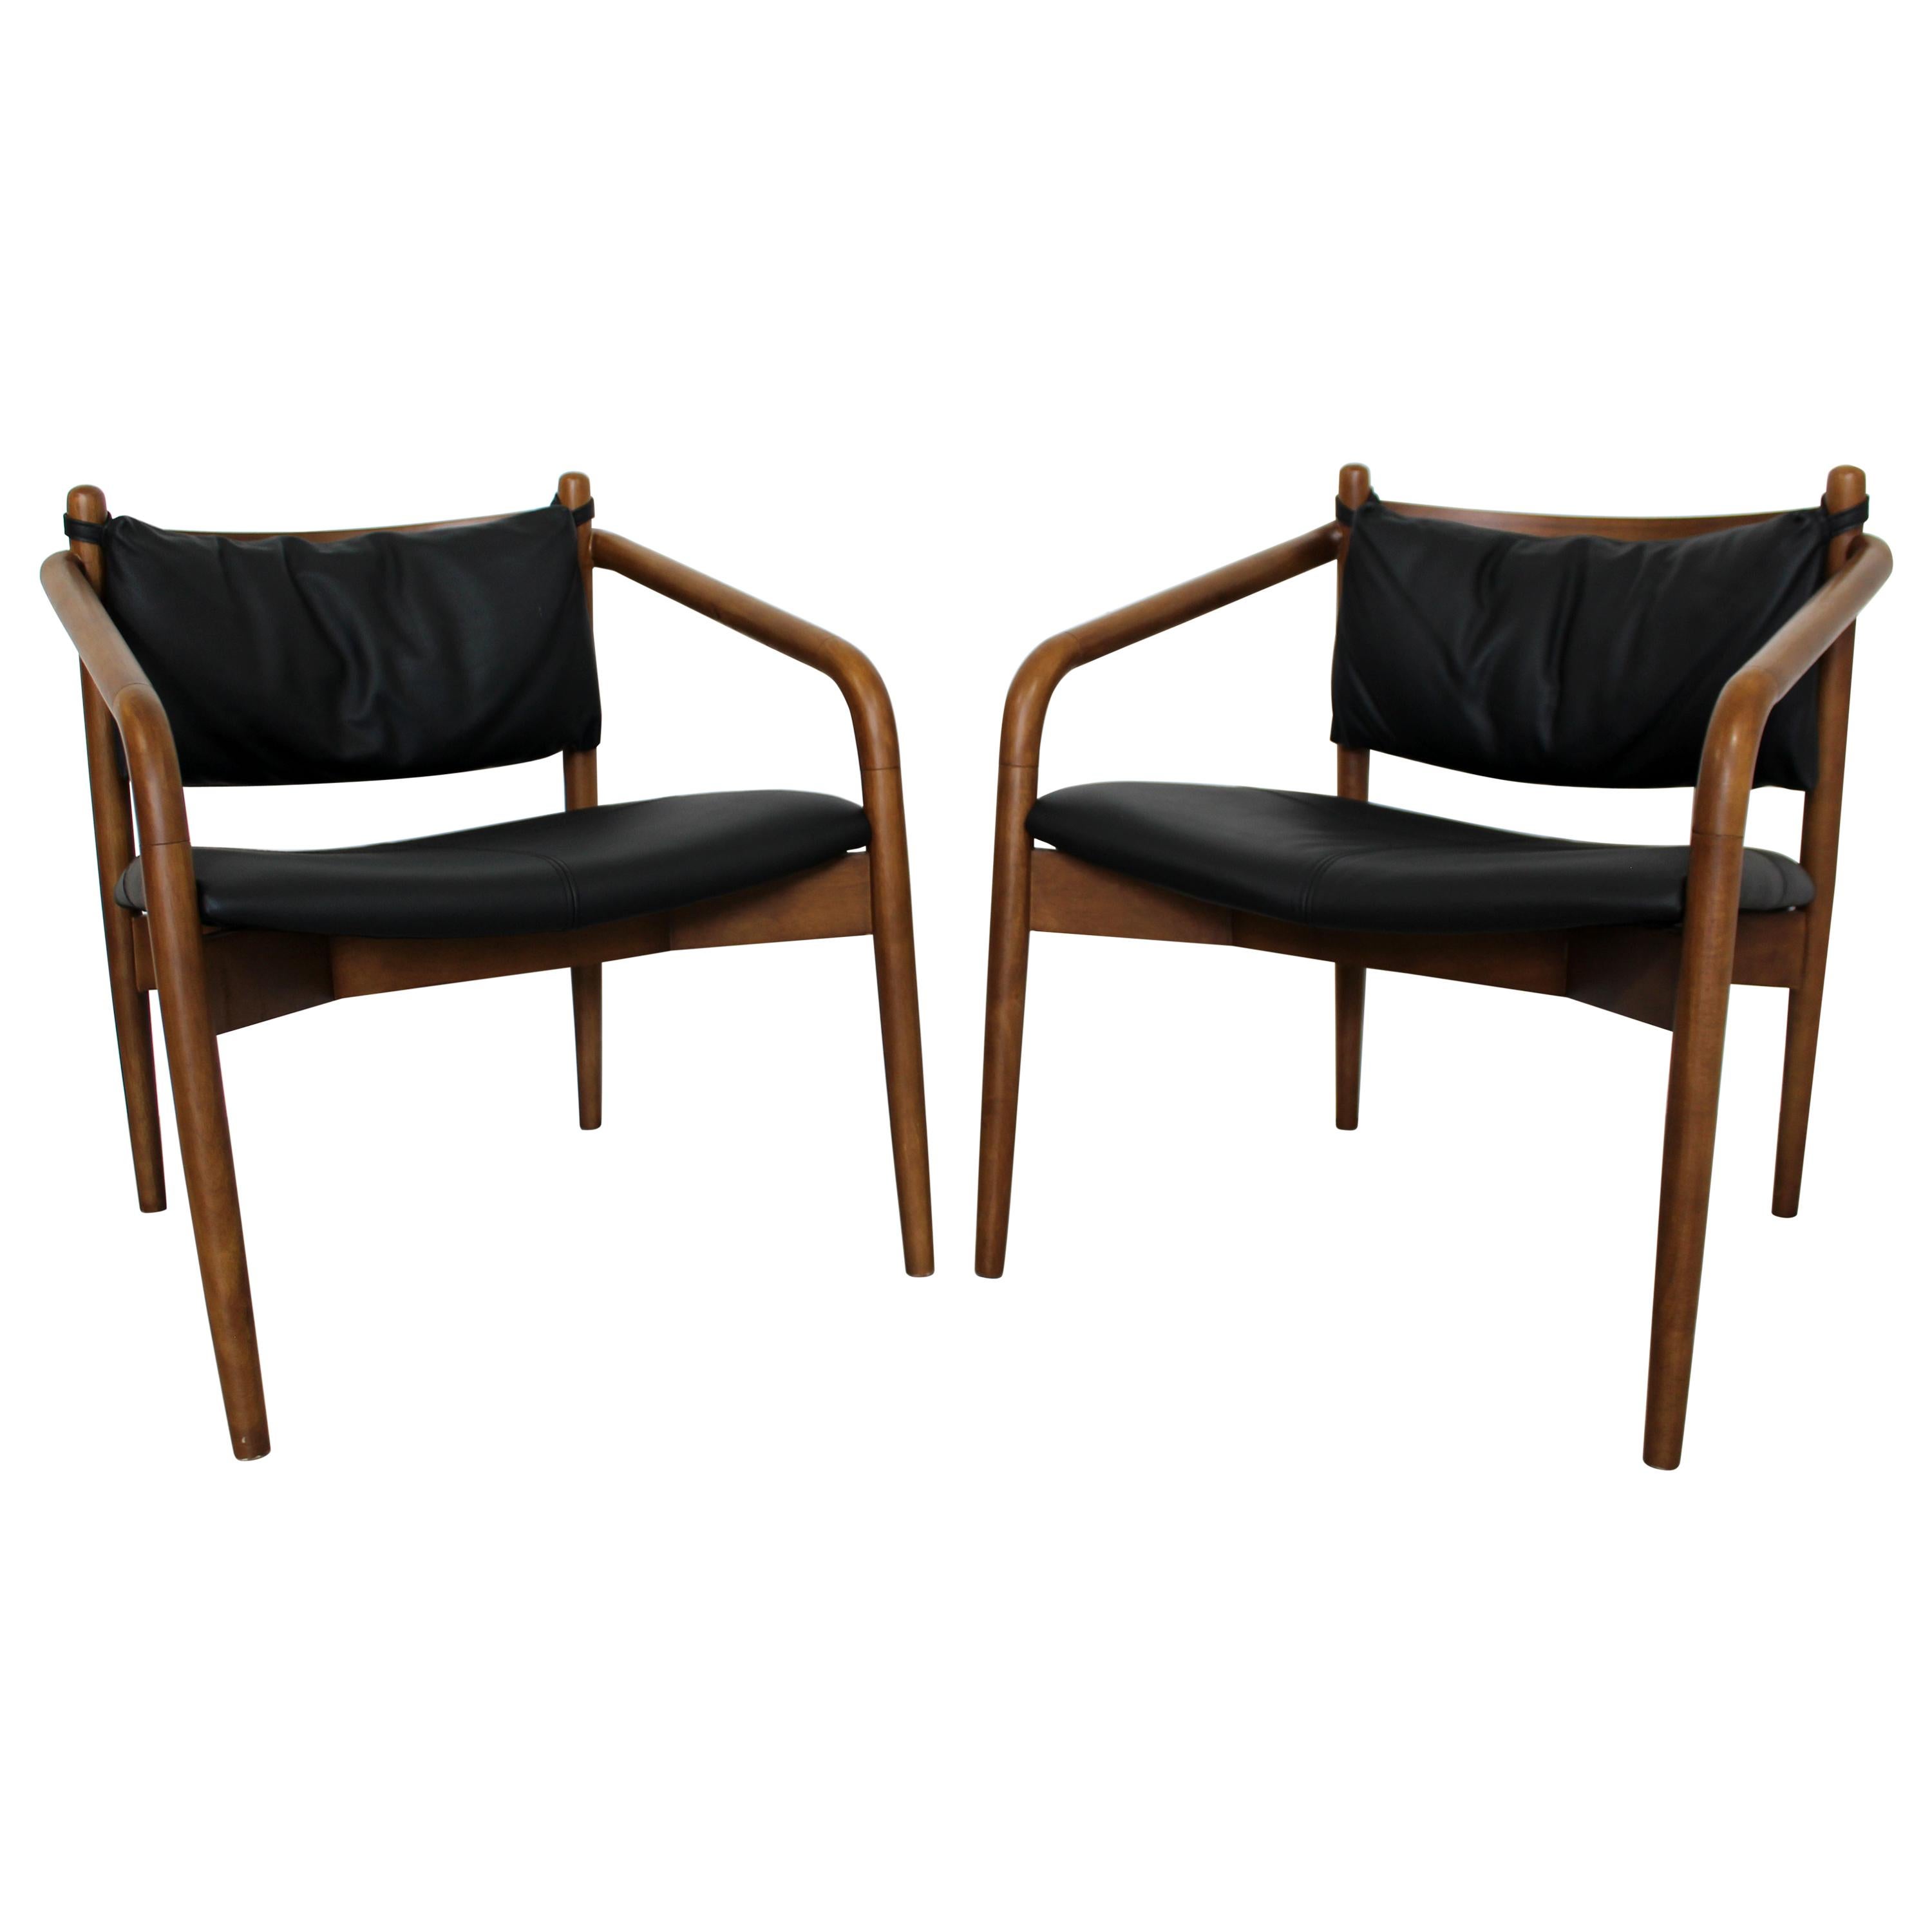 Mid-Century Modern Pair of Curved Bent Wood and Leather Lounge Armchairs, 1970s